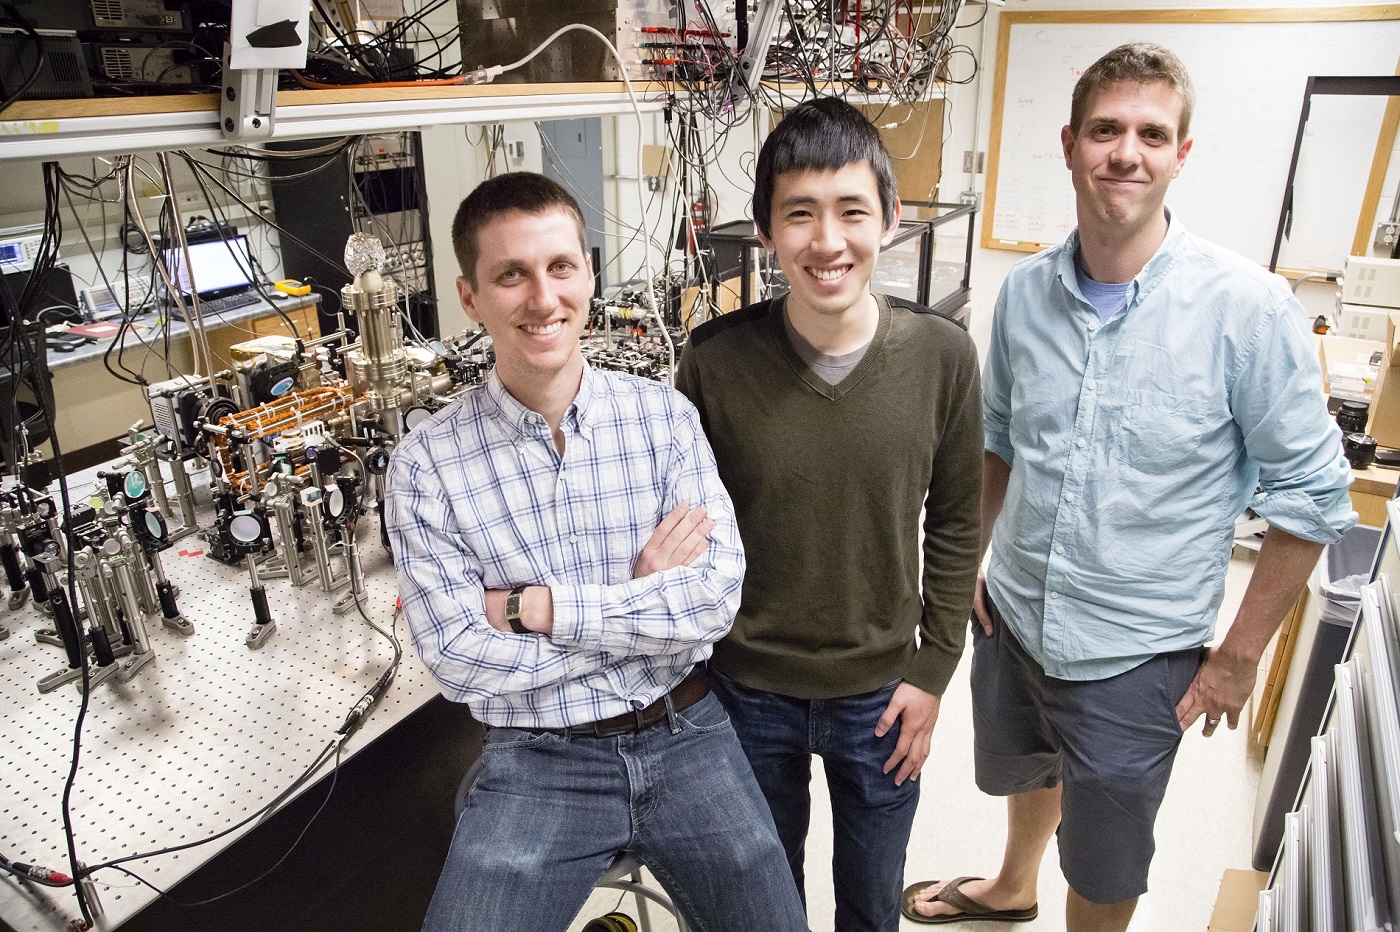 Graduate students Eric Meier and Fangzhao Alex An with Bryce Gadway in Loomis Laboratory